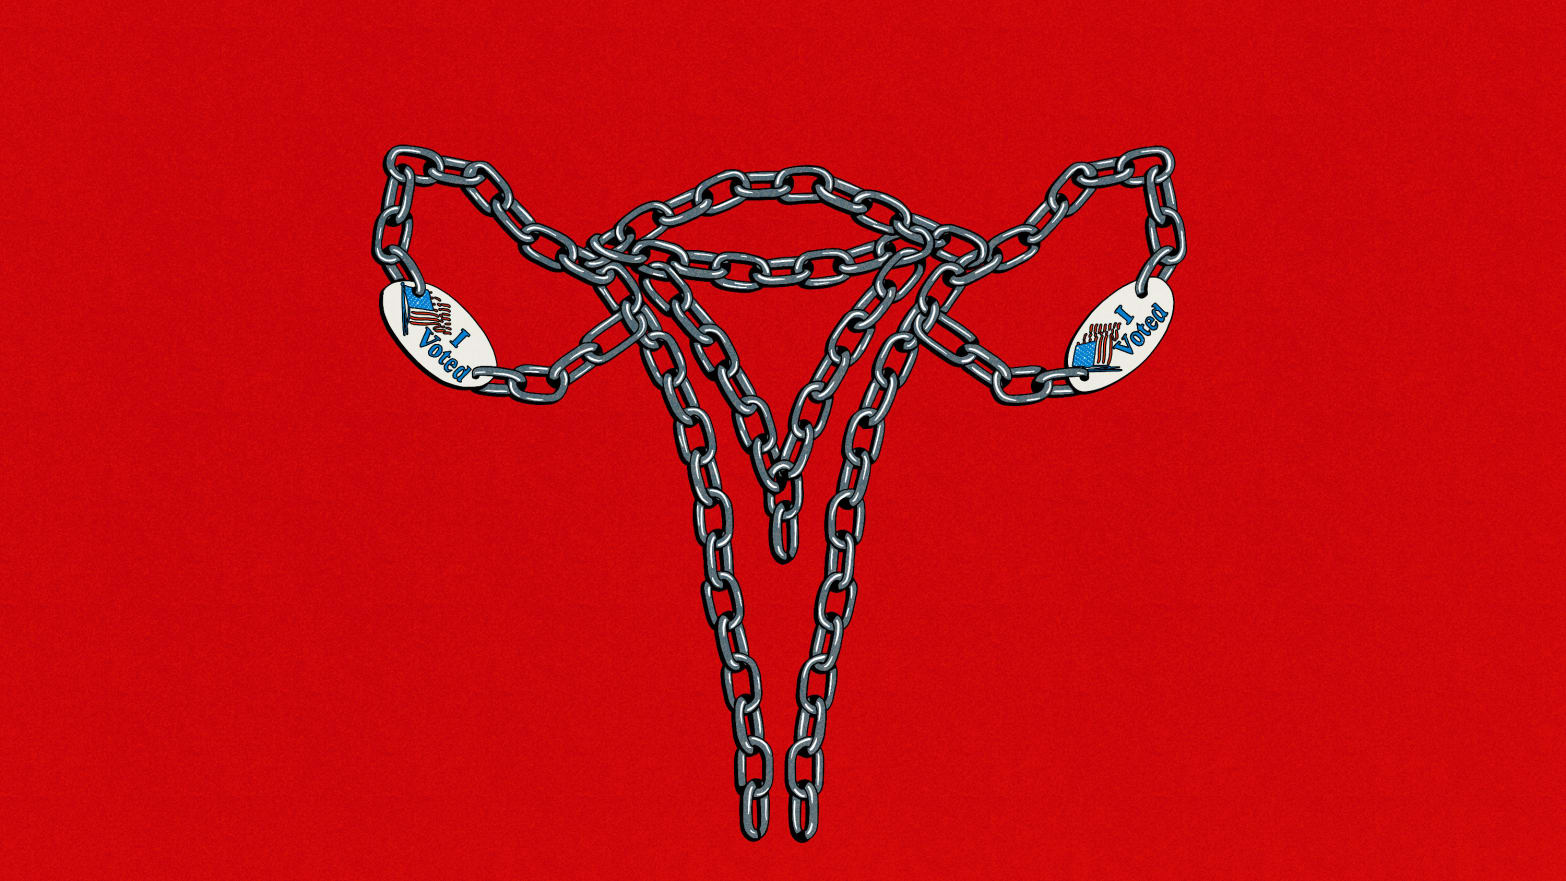 Illustration of a uterus made out of chains with "I voted" stickers